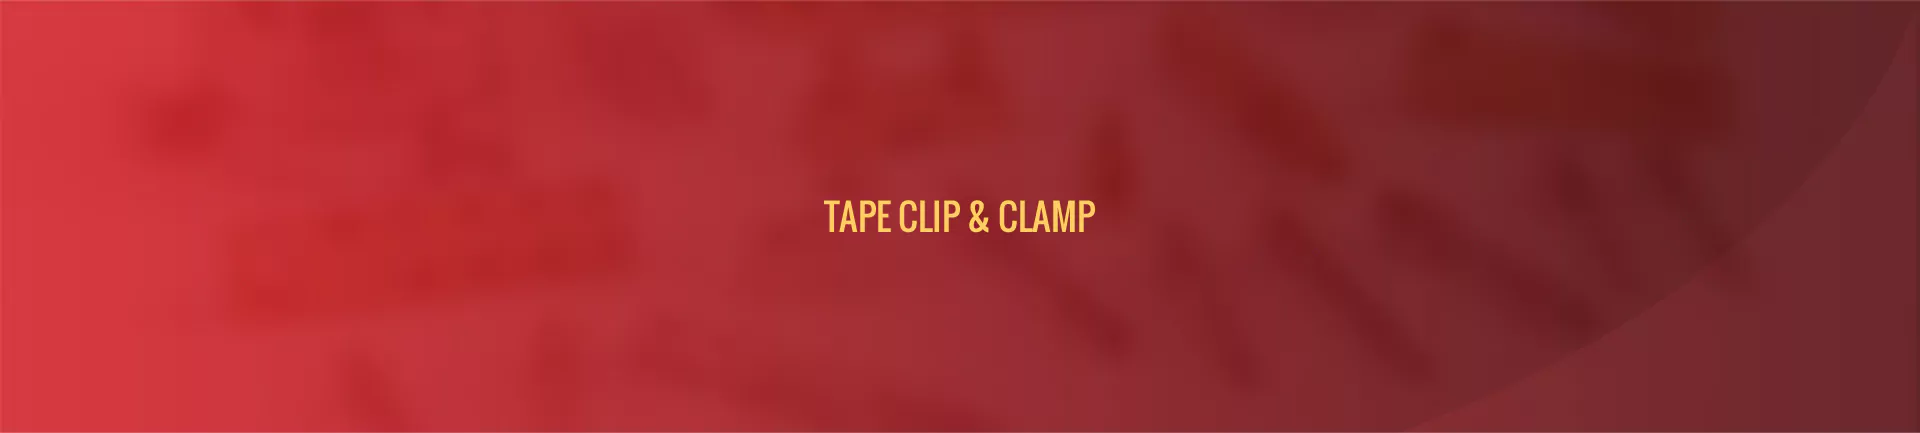 tape-clip-clamp-banner